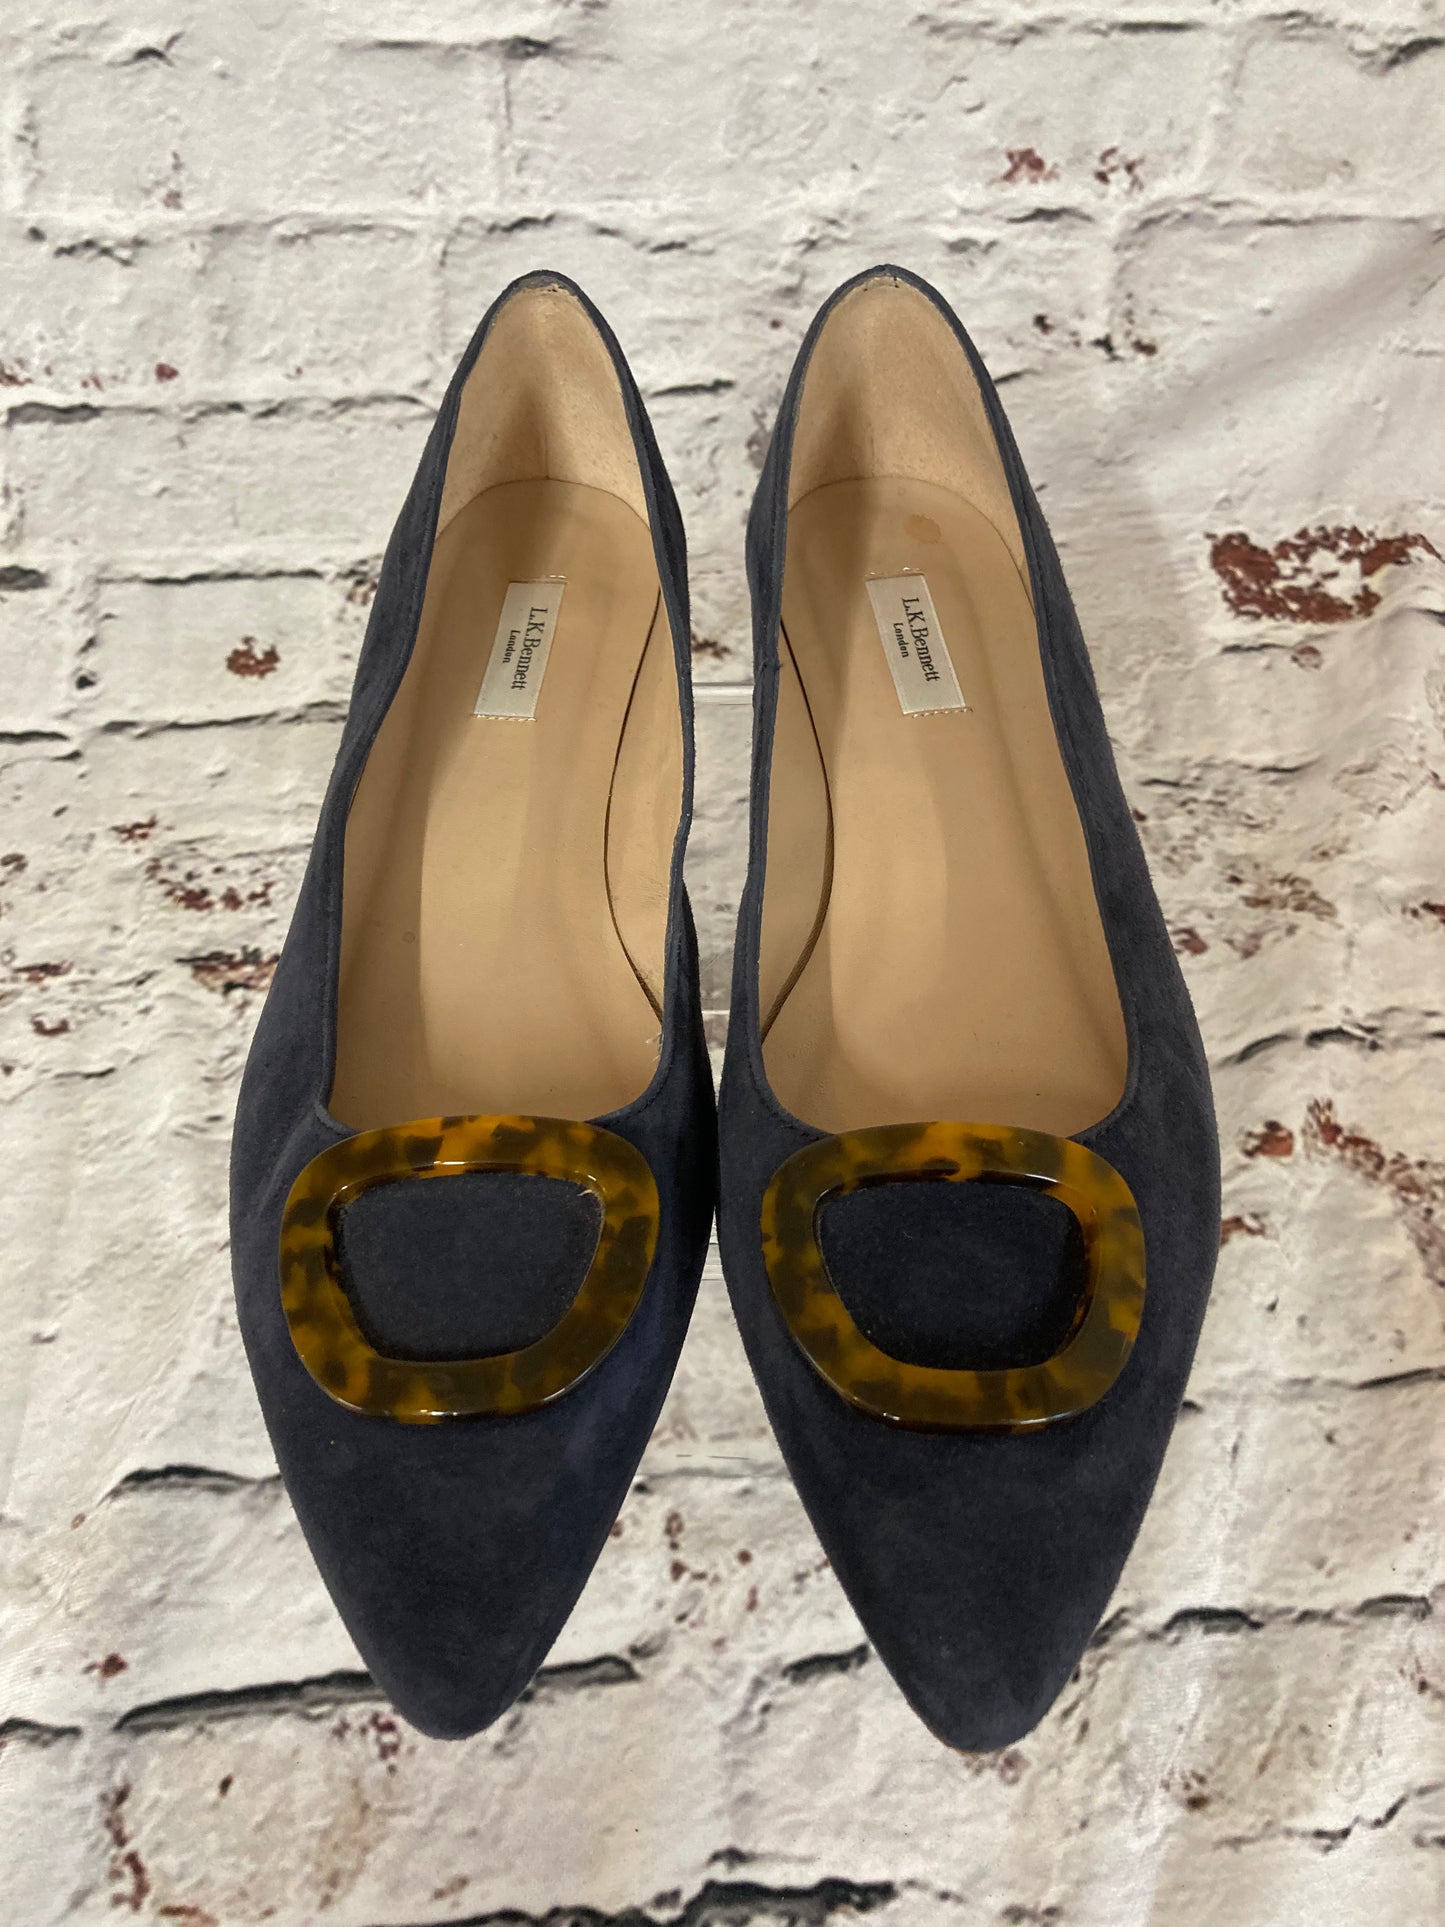 1950s style LK Bennett Grey Suede Pumps With Tortoiseshell Buckle Size 7 (41)